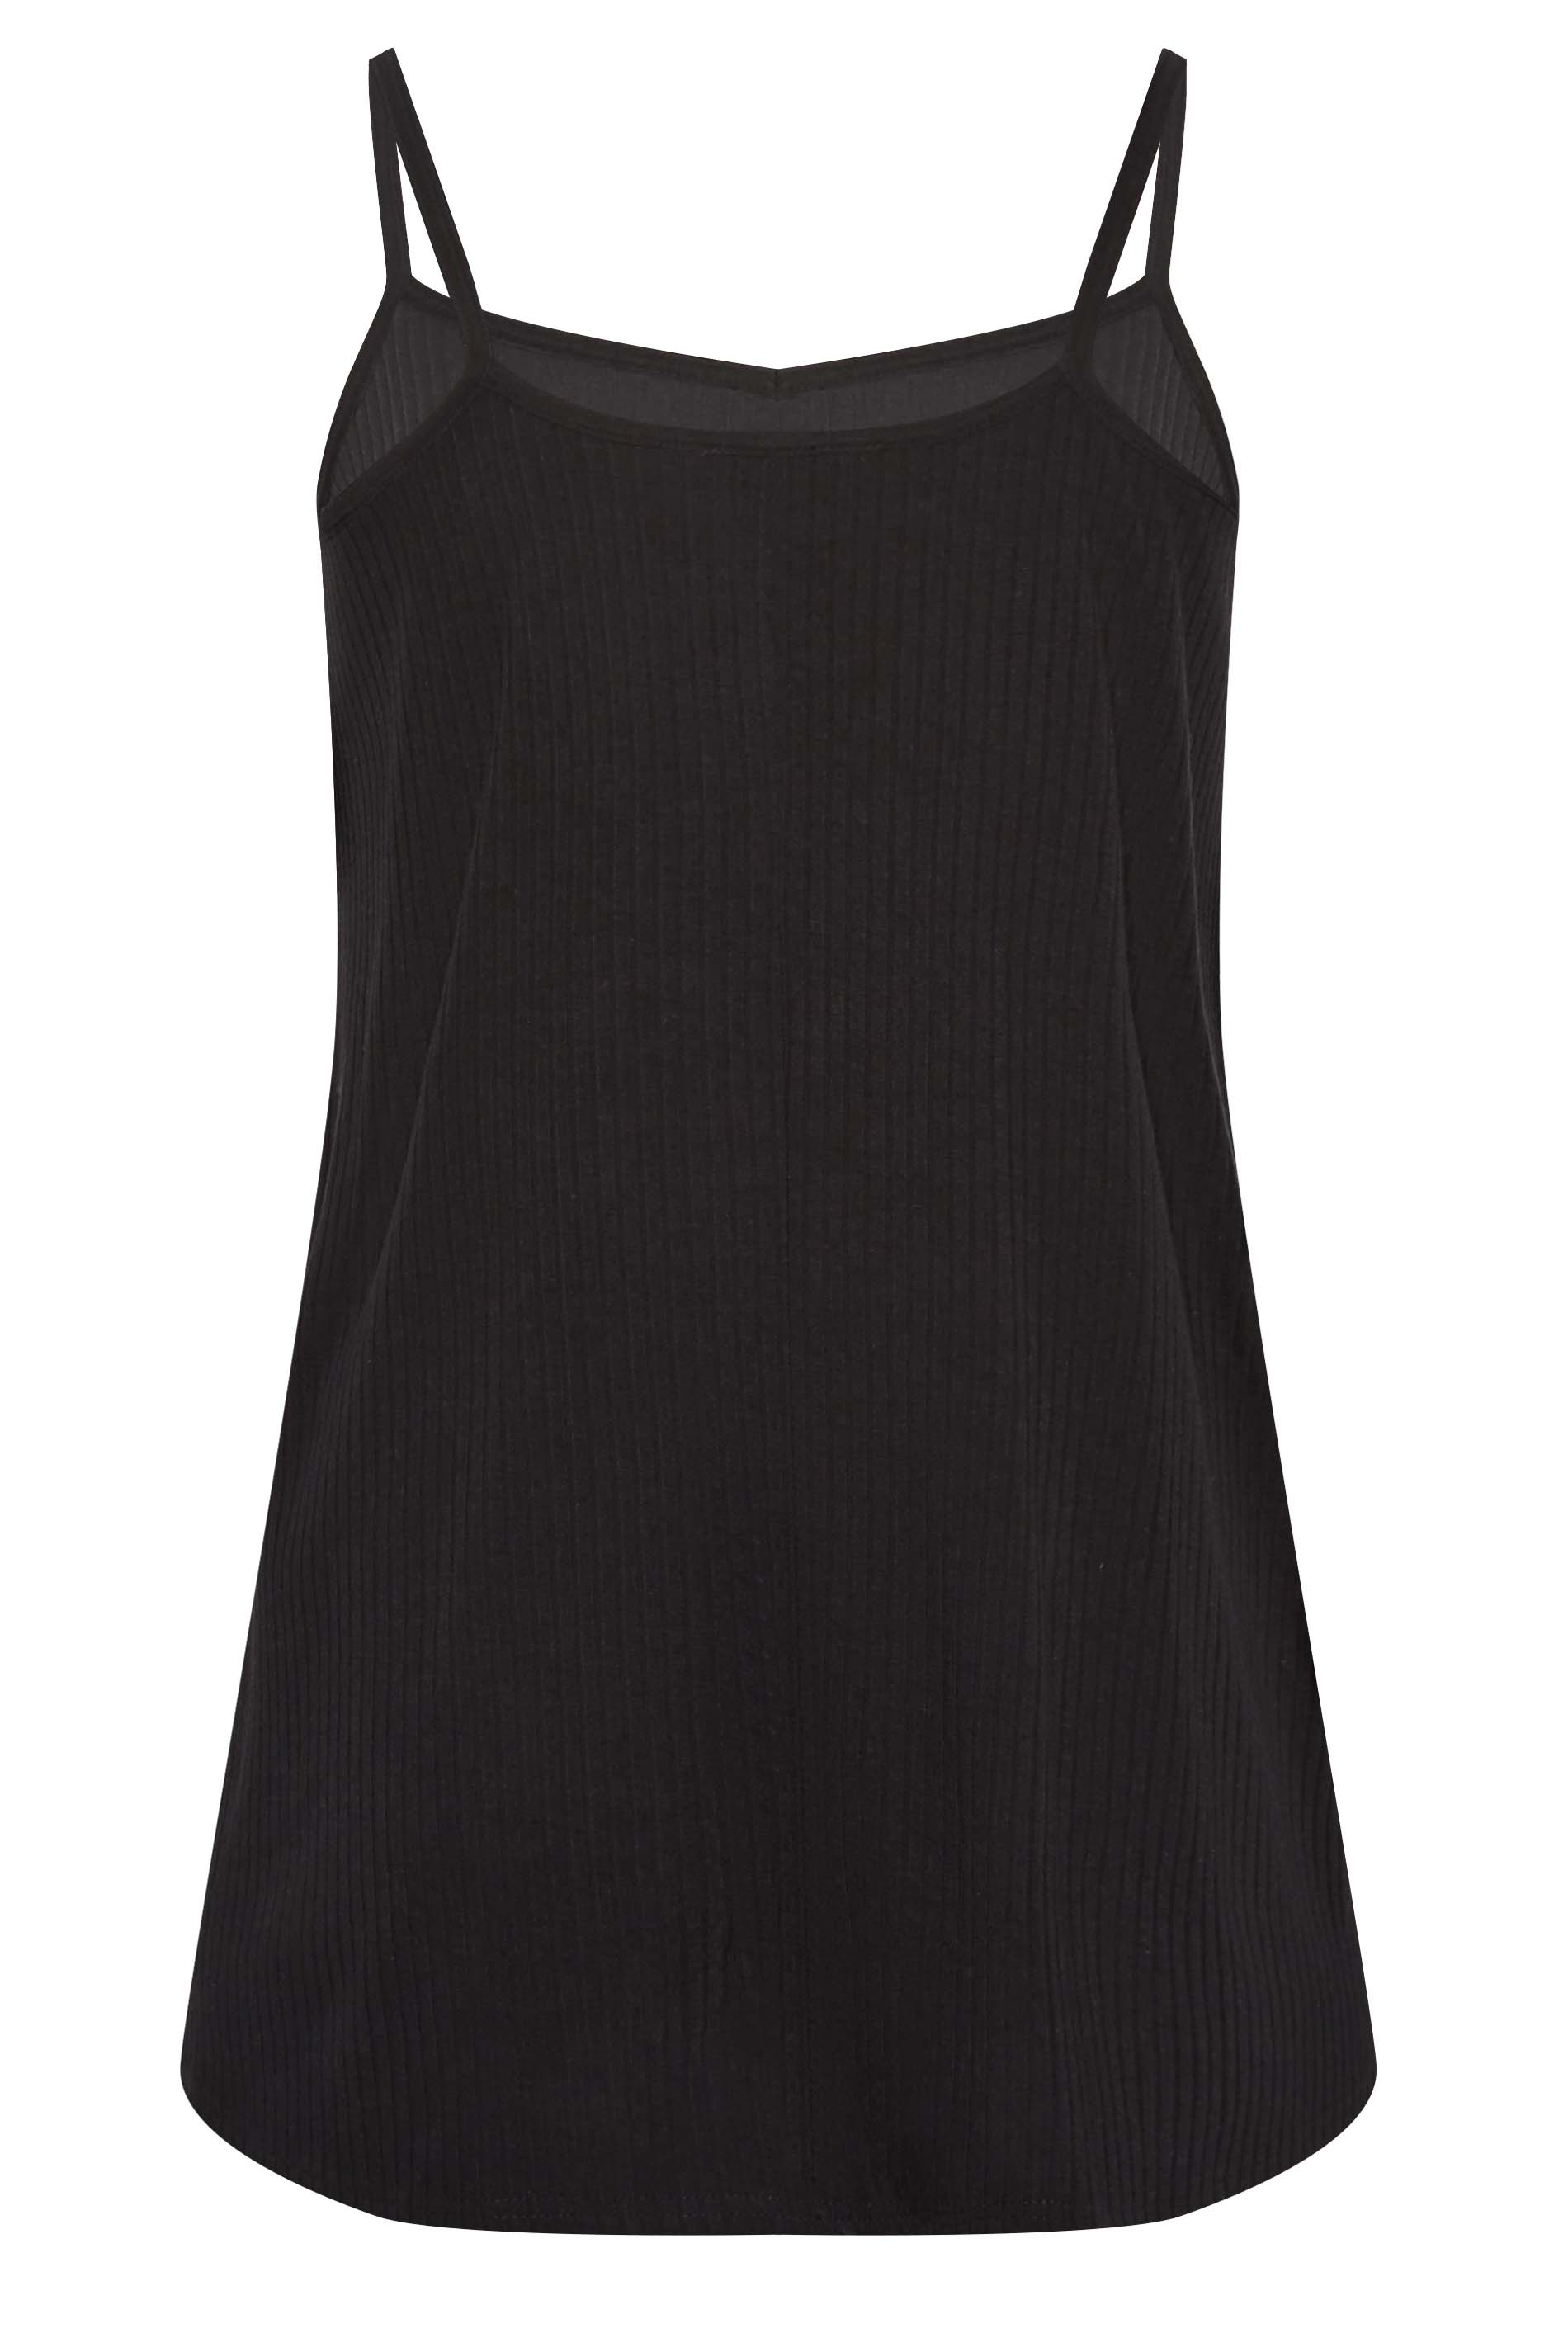 YOURS Curve Plus Size Black Ribbed Swing Cami Vest Top